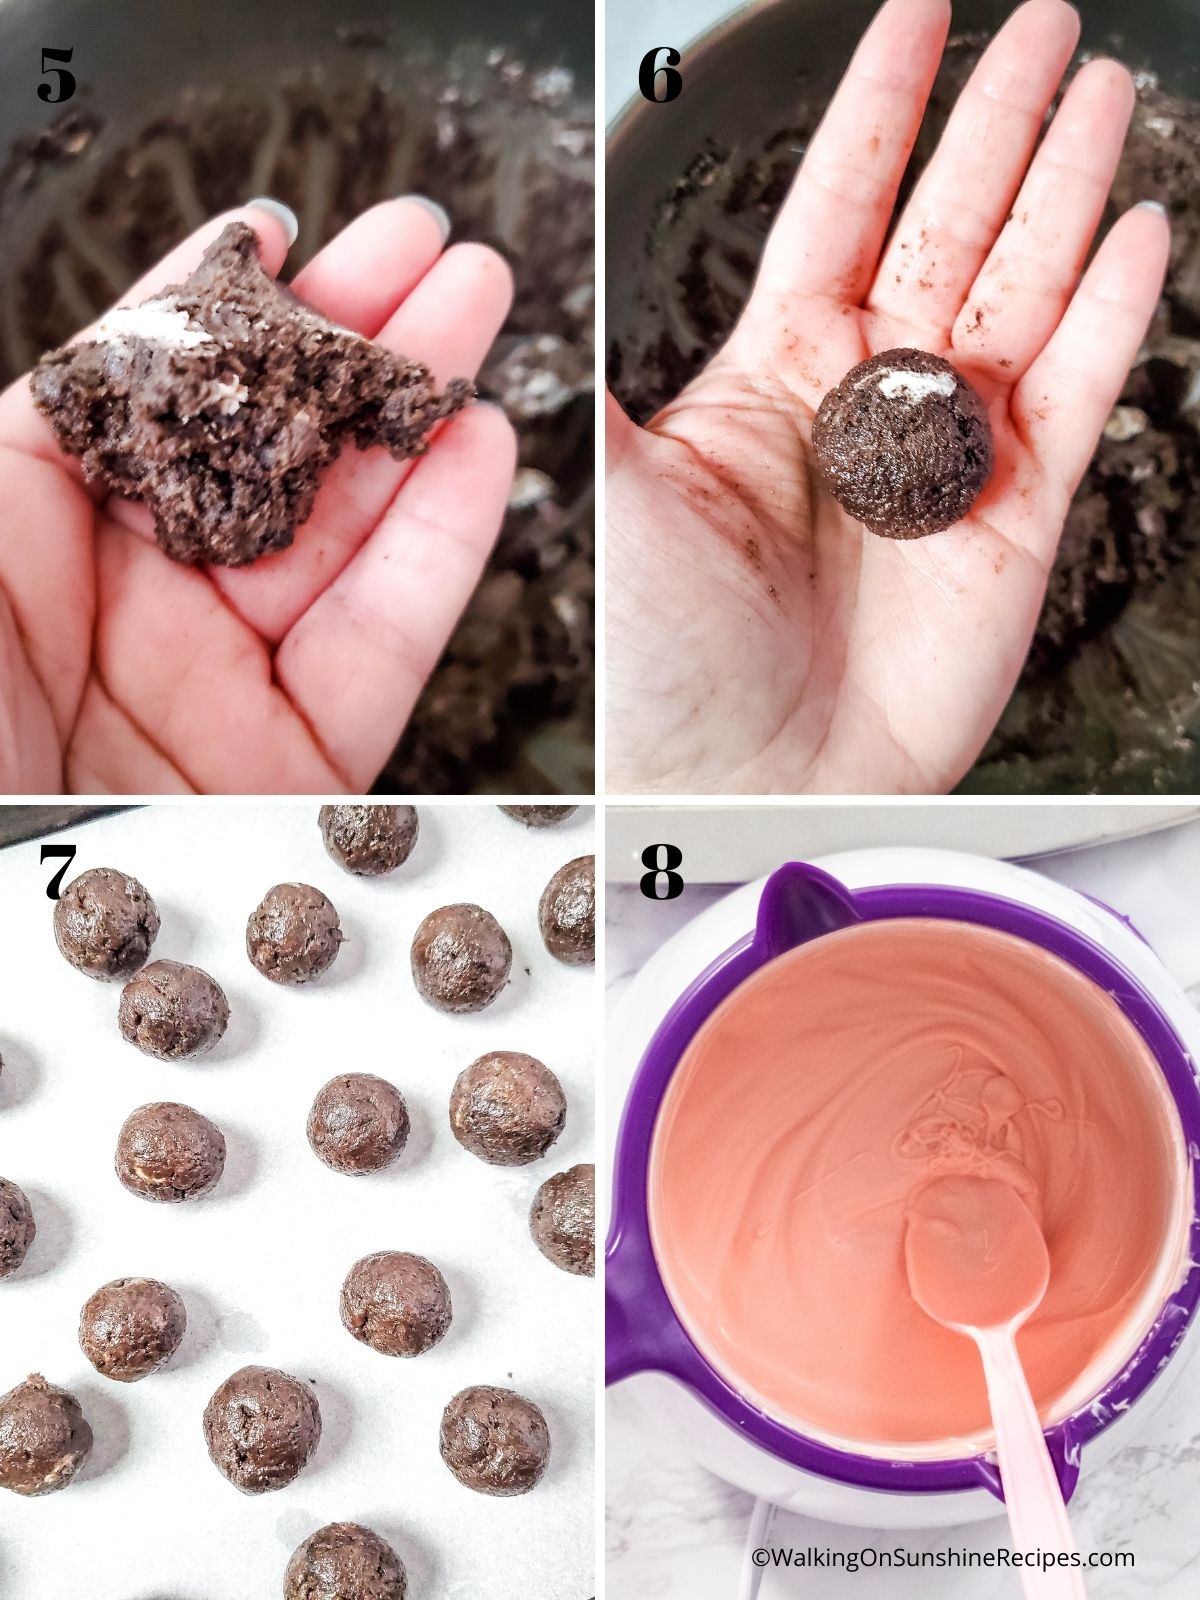 Form the truffles and dip in melted chocolate.